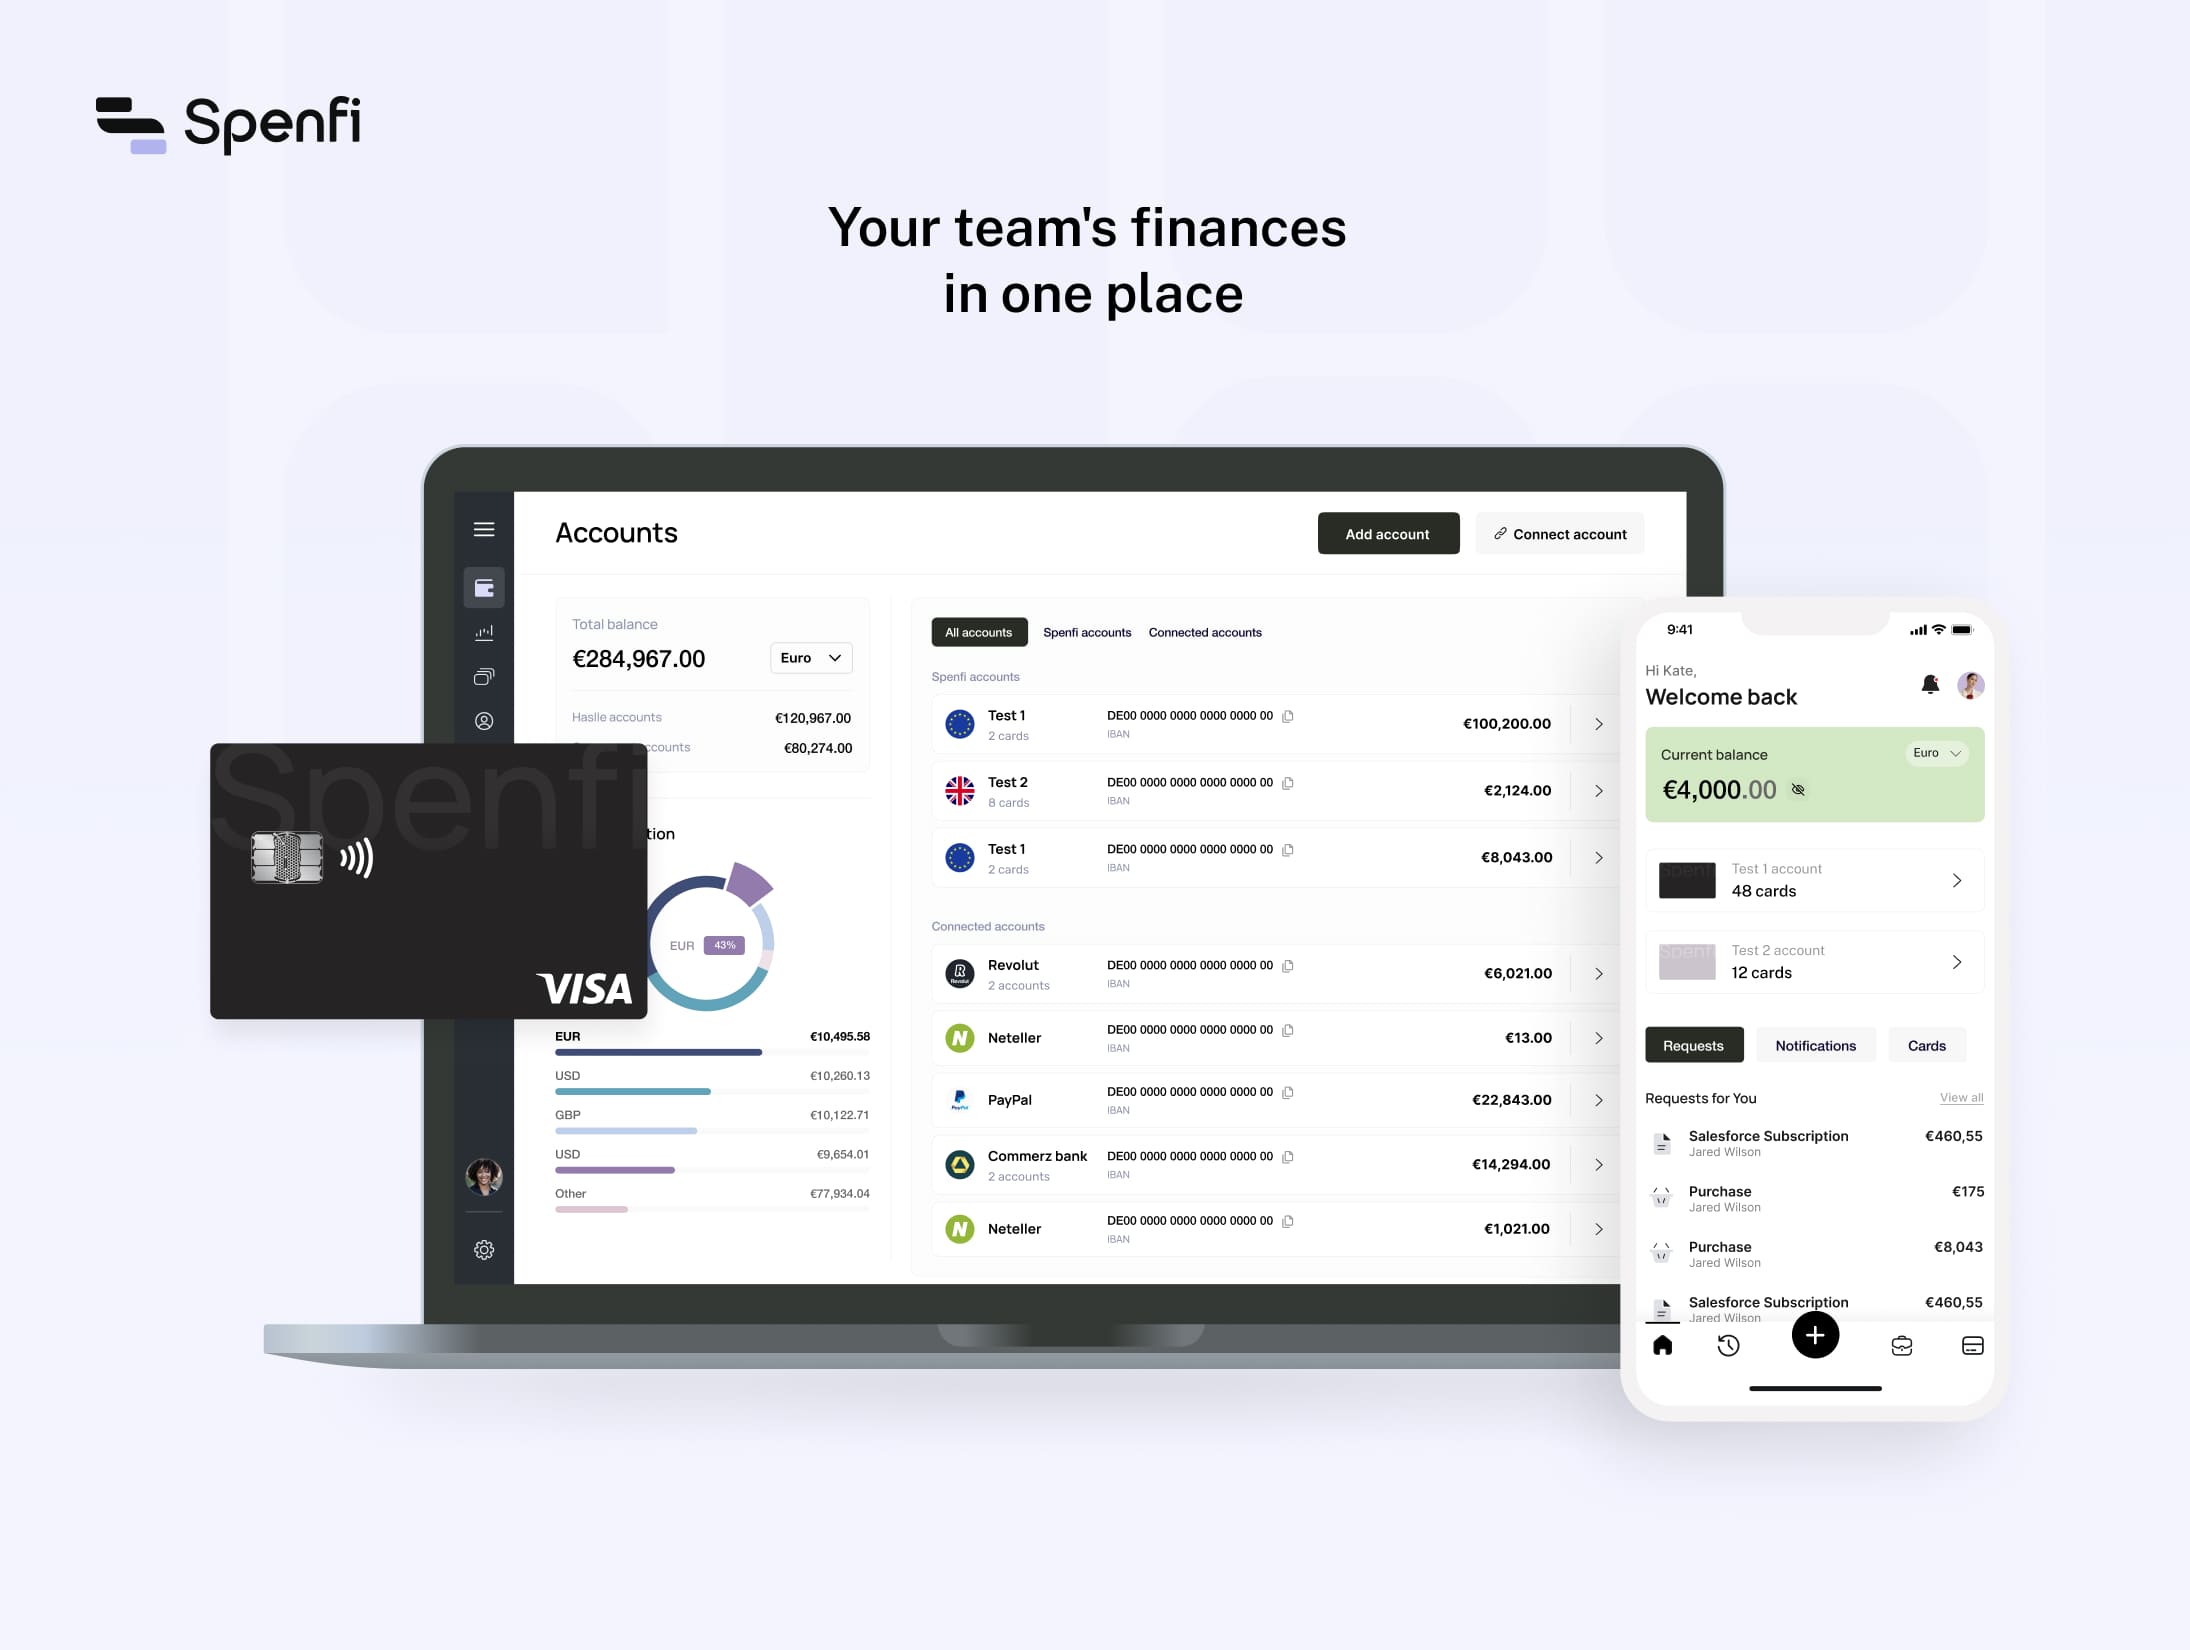 Spenfi product display, showing payment card, mobile application and spending dashboard